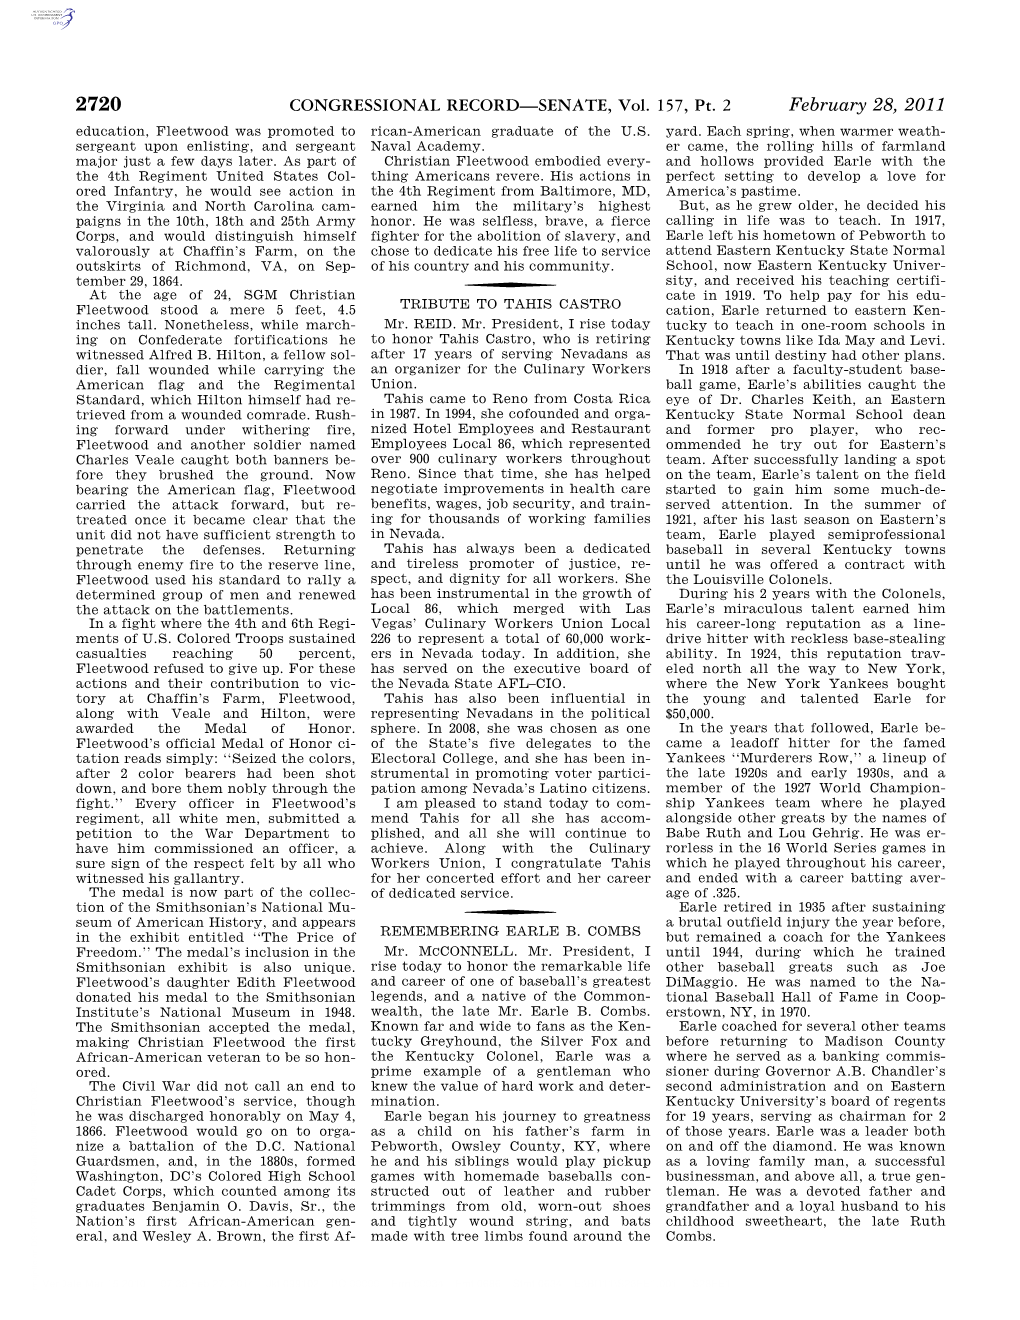 CONGRESSIONAL RECORD—SENATE, Vol. 157, Pt. 2 February 28, 2011 Education, Fleetwood Was Promoted to Rican-American Graduate of the U.S